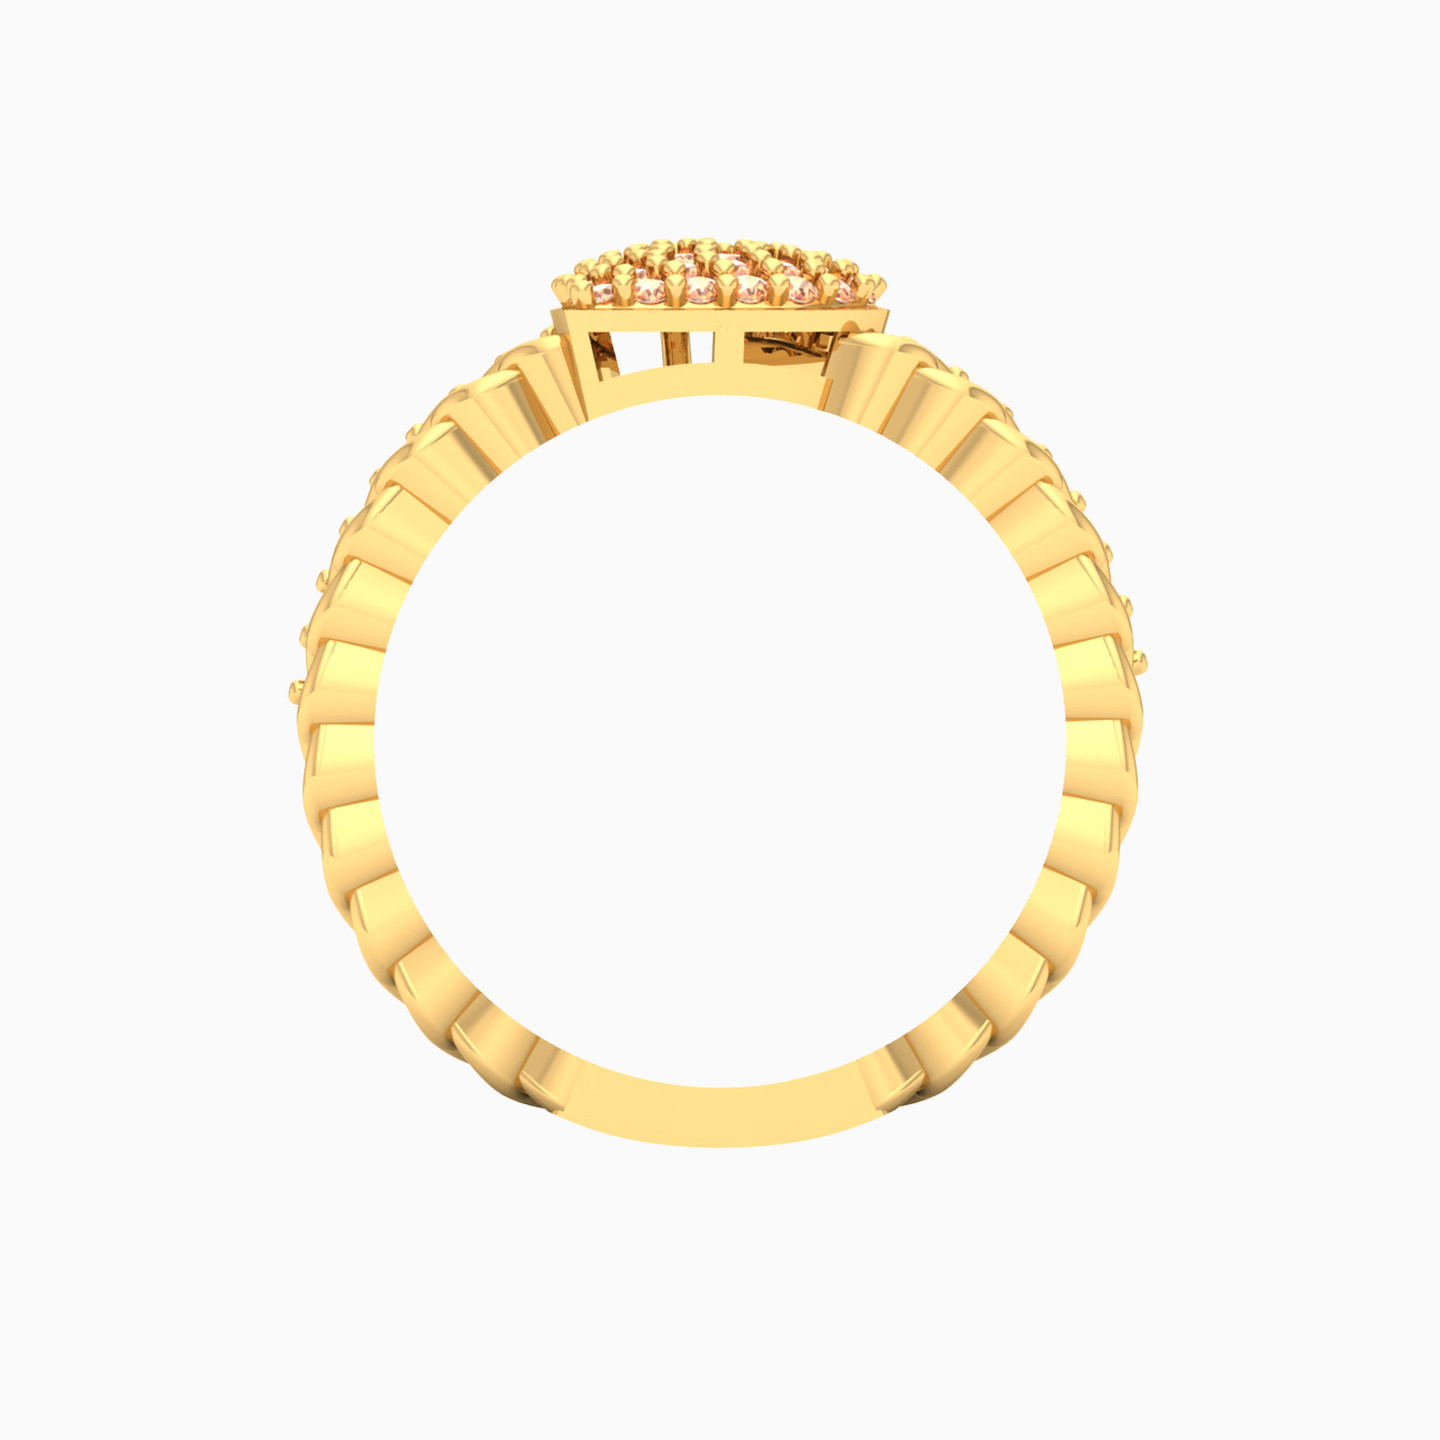 18K Gold Colored Stones Statement Ring - 3